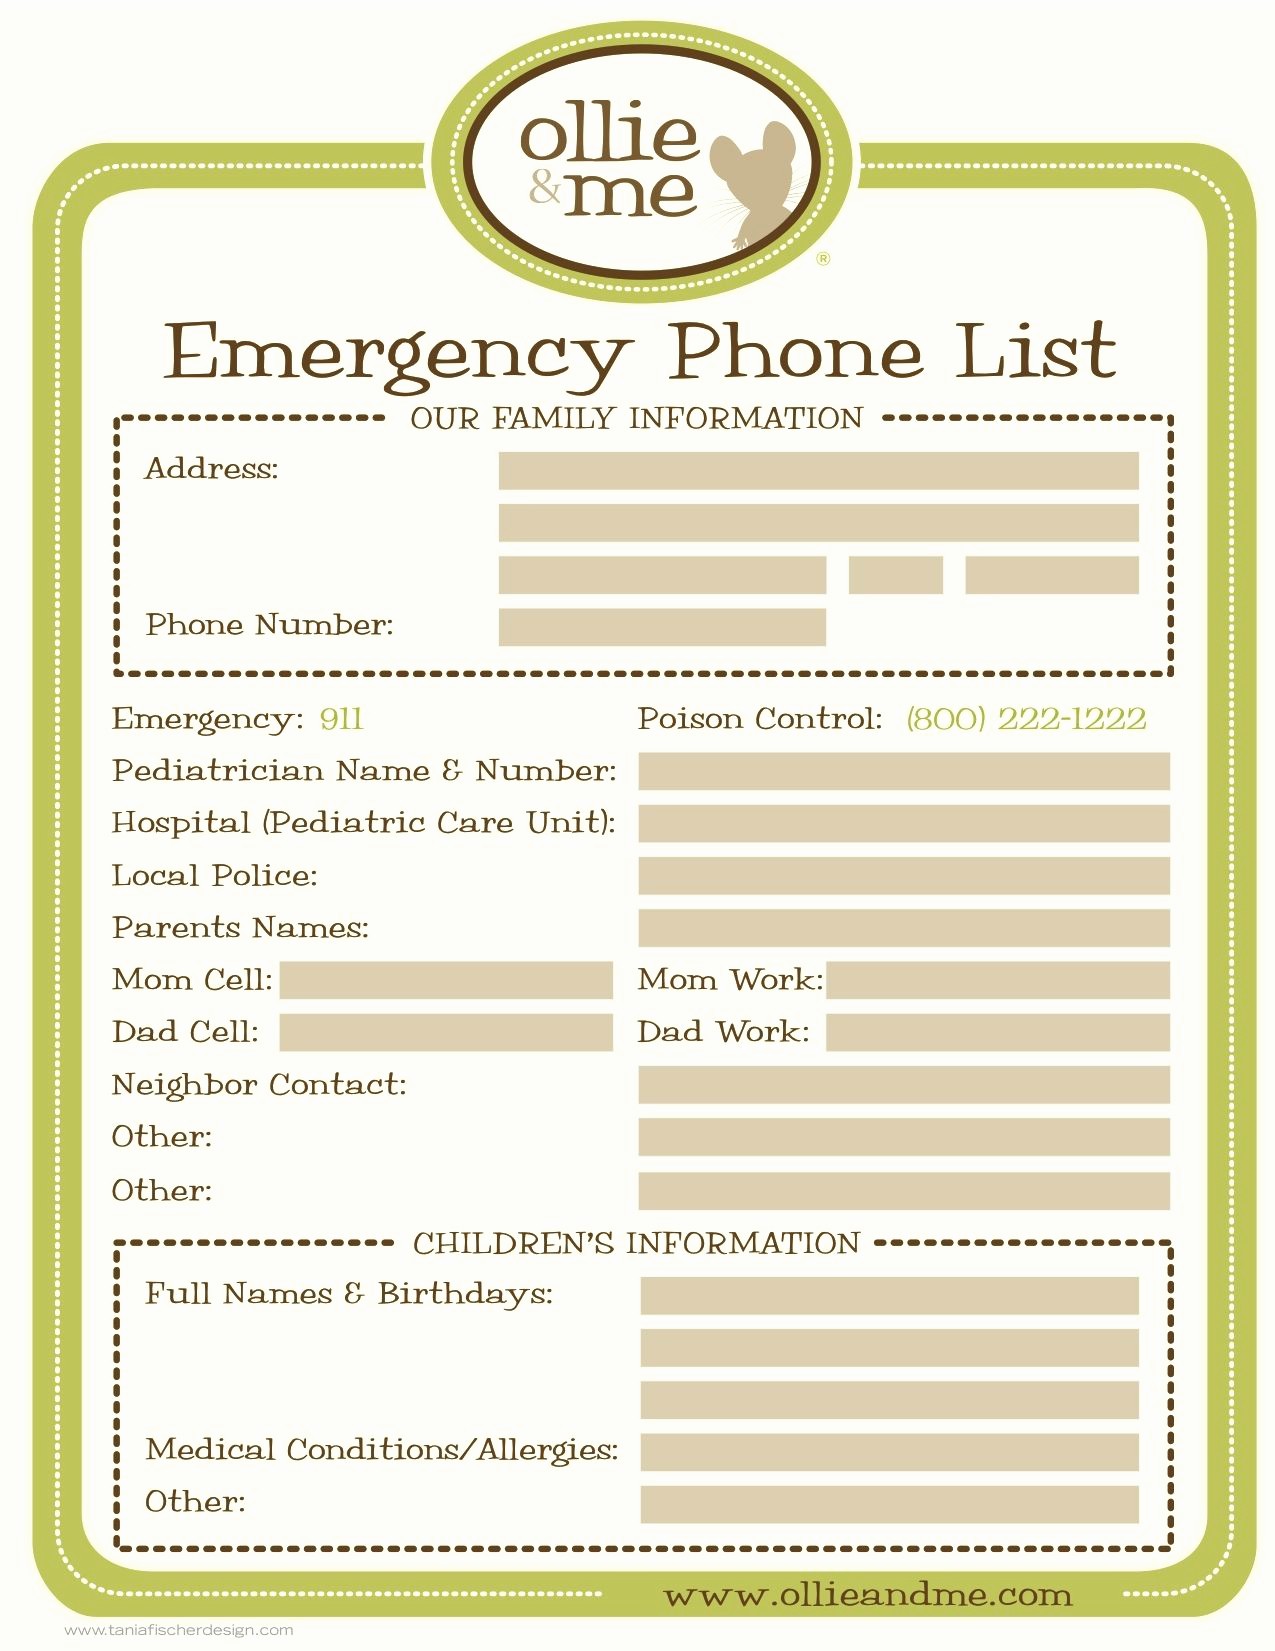 Emergency Contact List for Kids Luxury Emergency Phone List for Your Babysitter